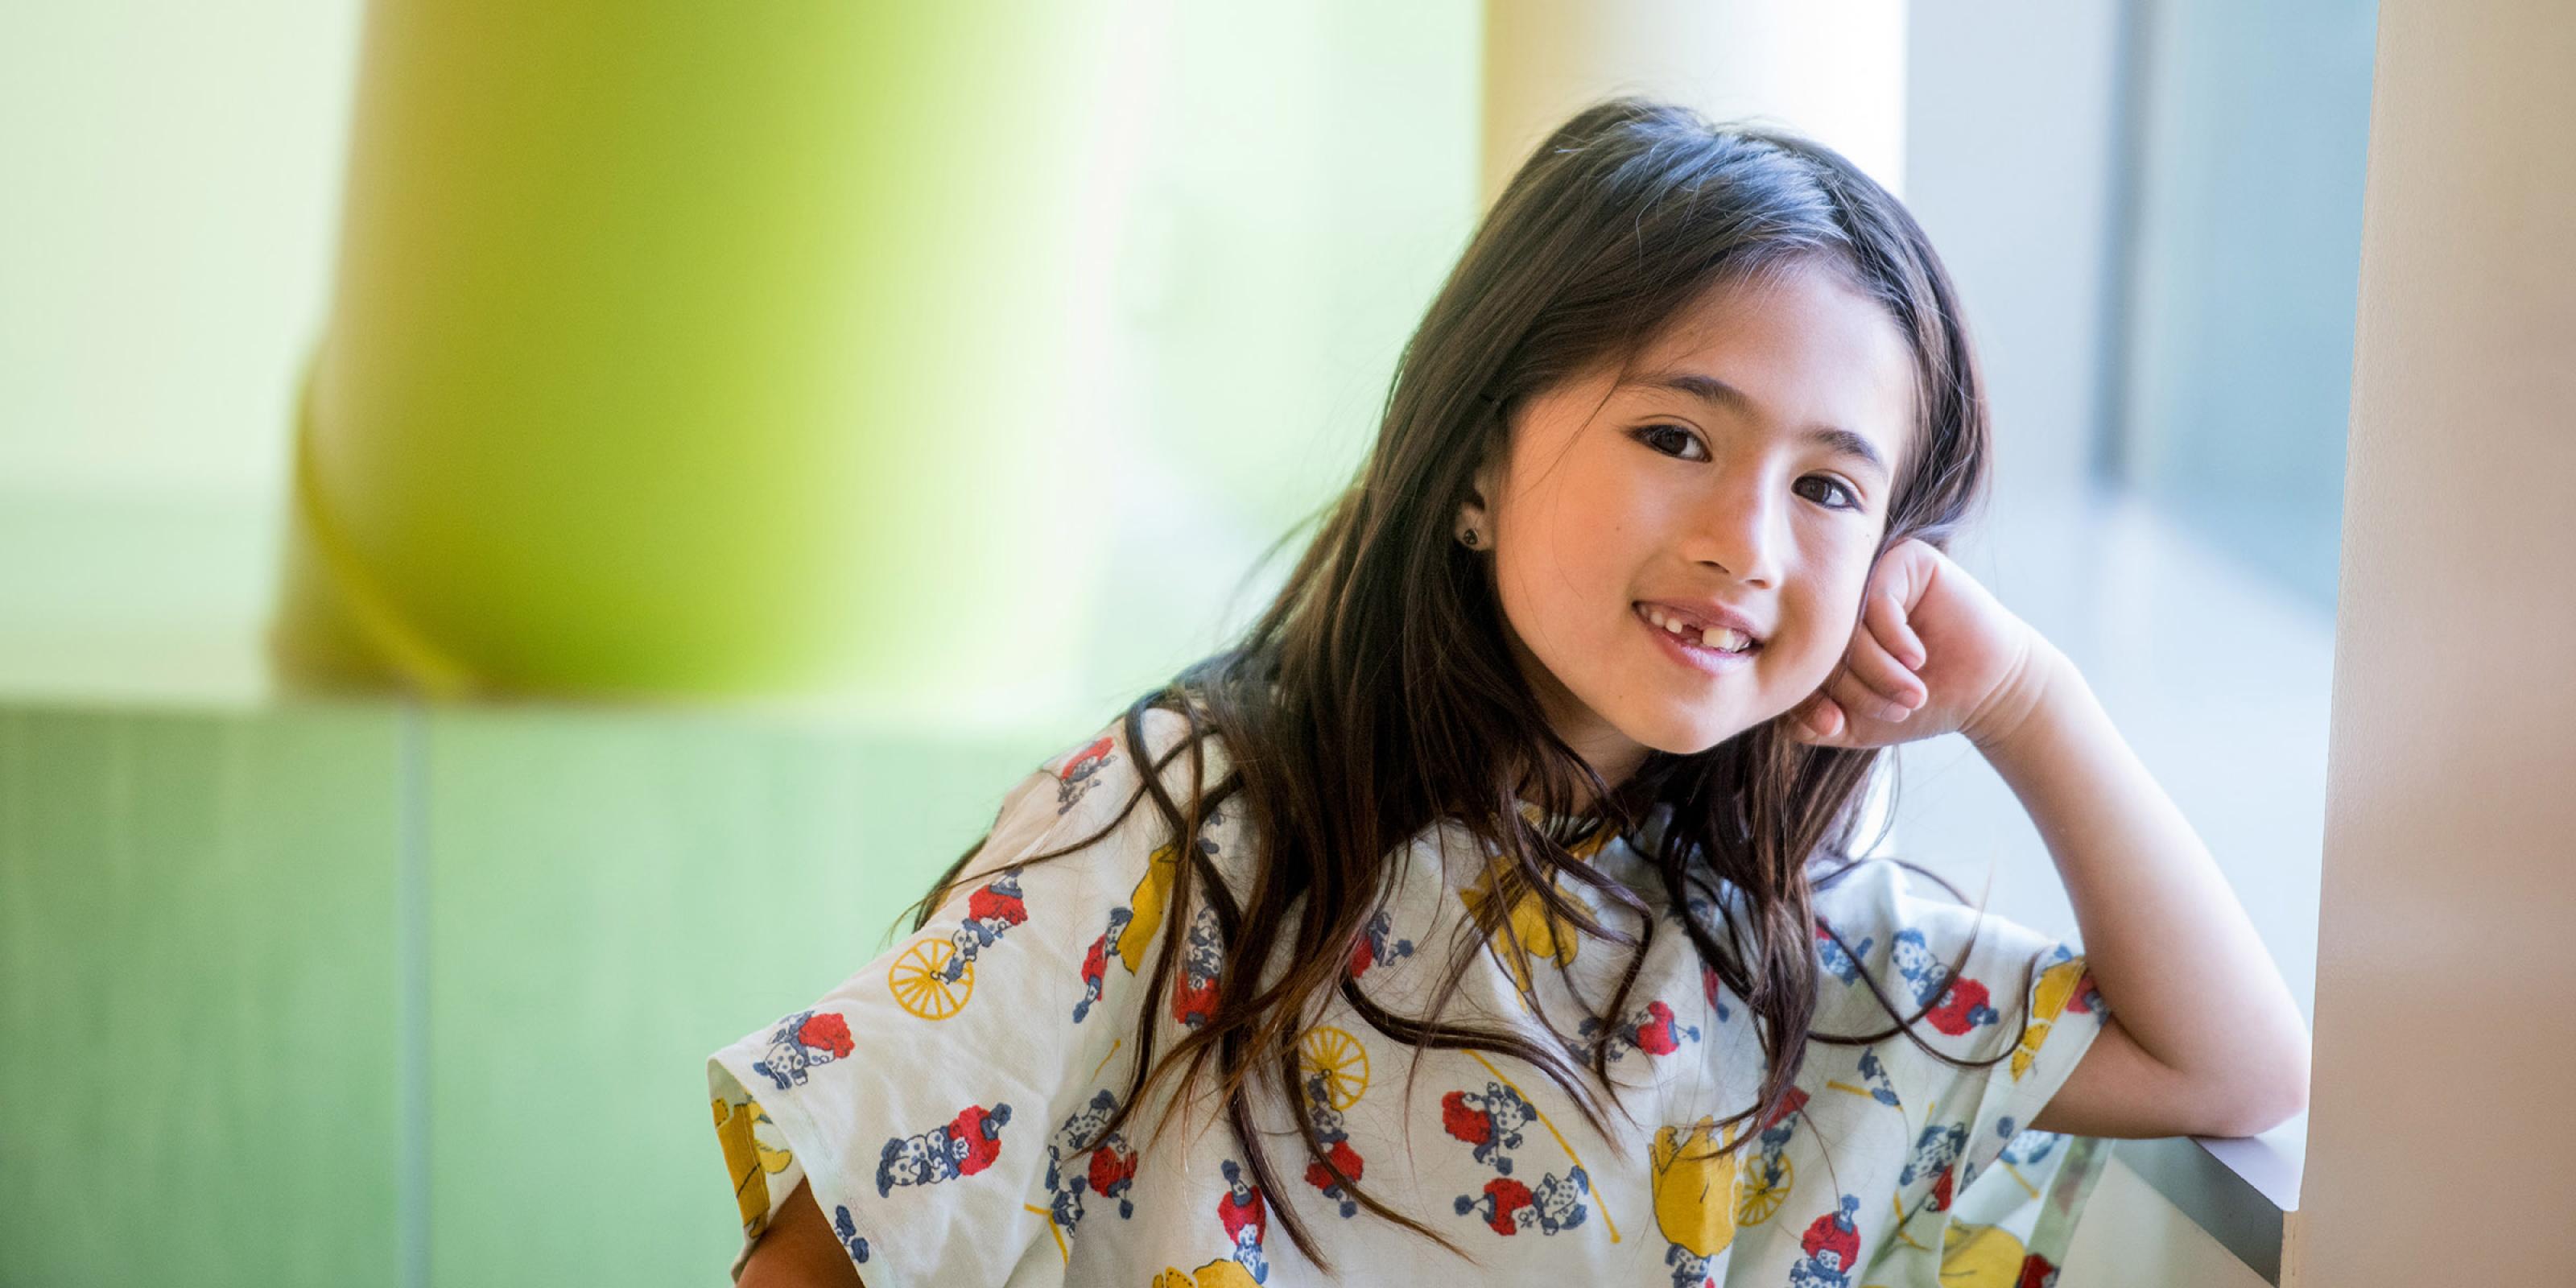 Smiling pediatric patient at the UCSF Brain Tumor Center